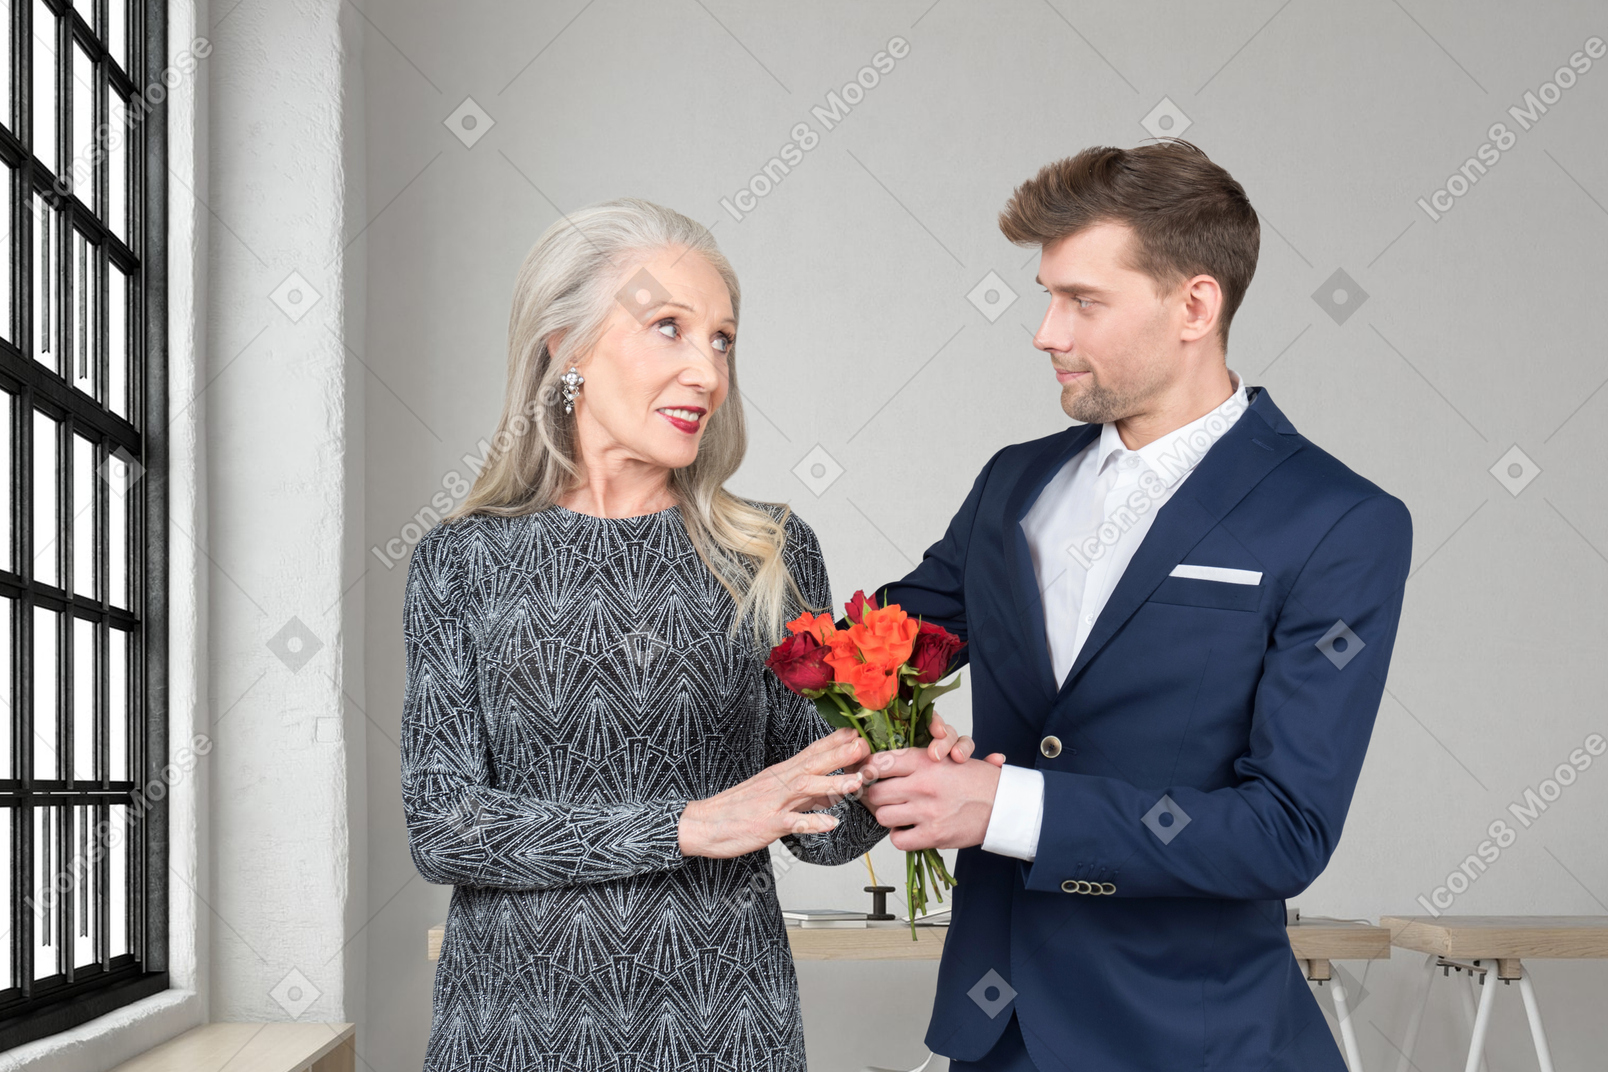 Guy giving a flower bouquet